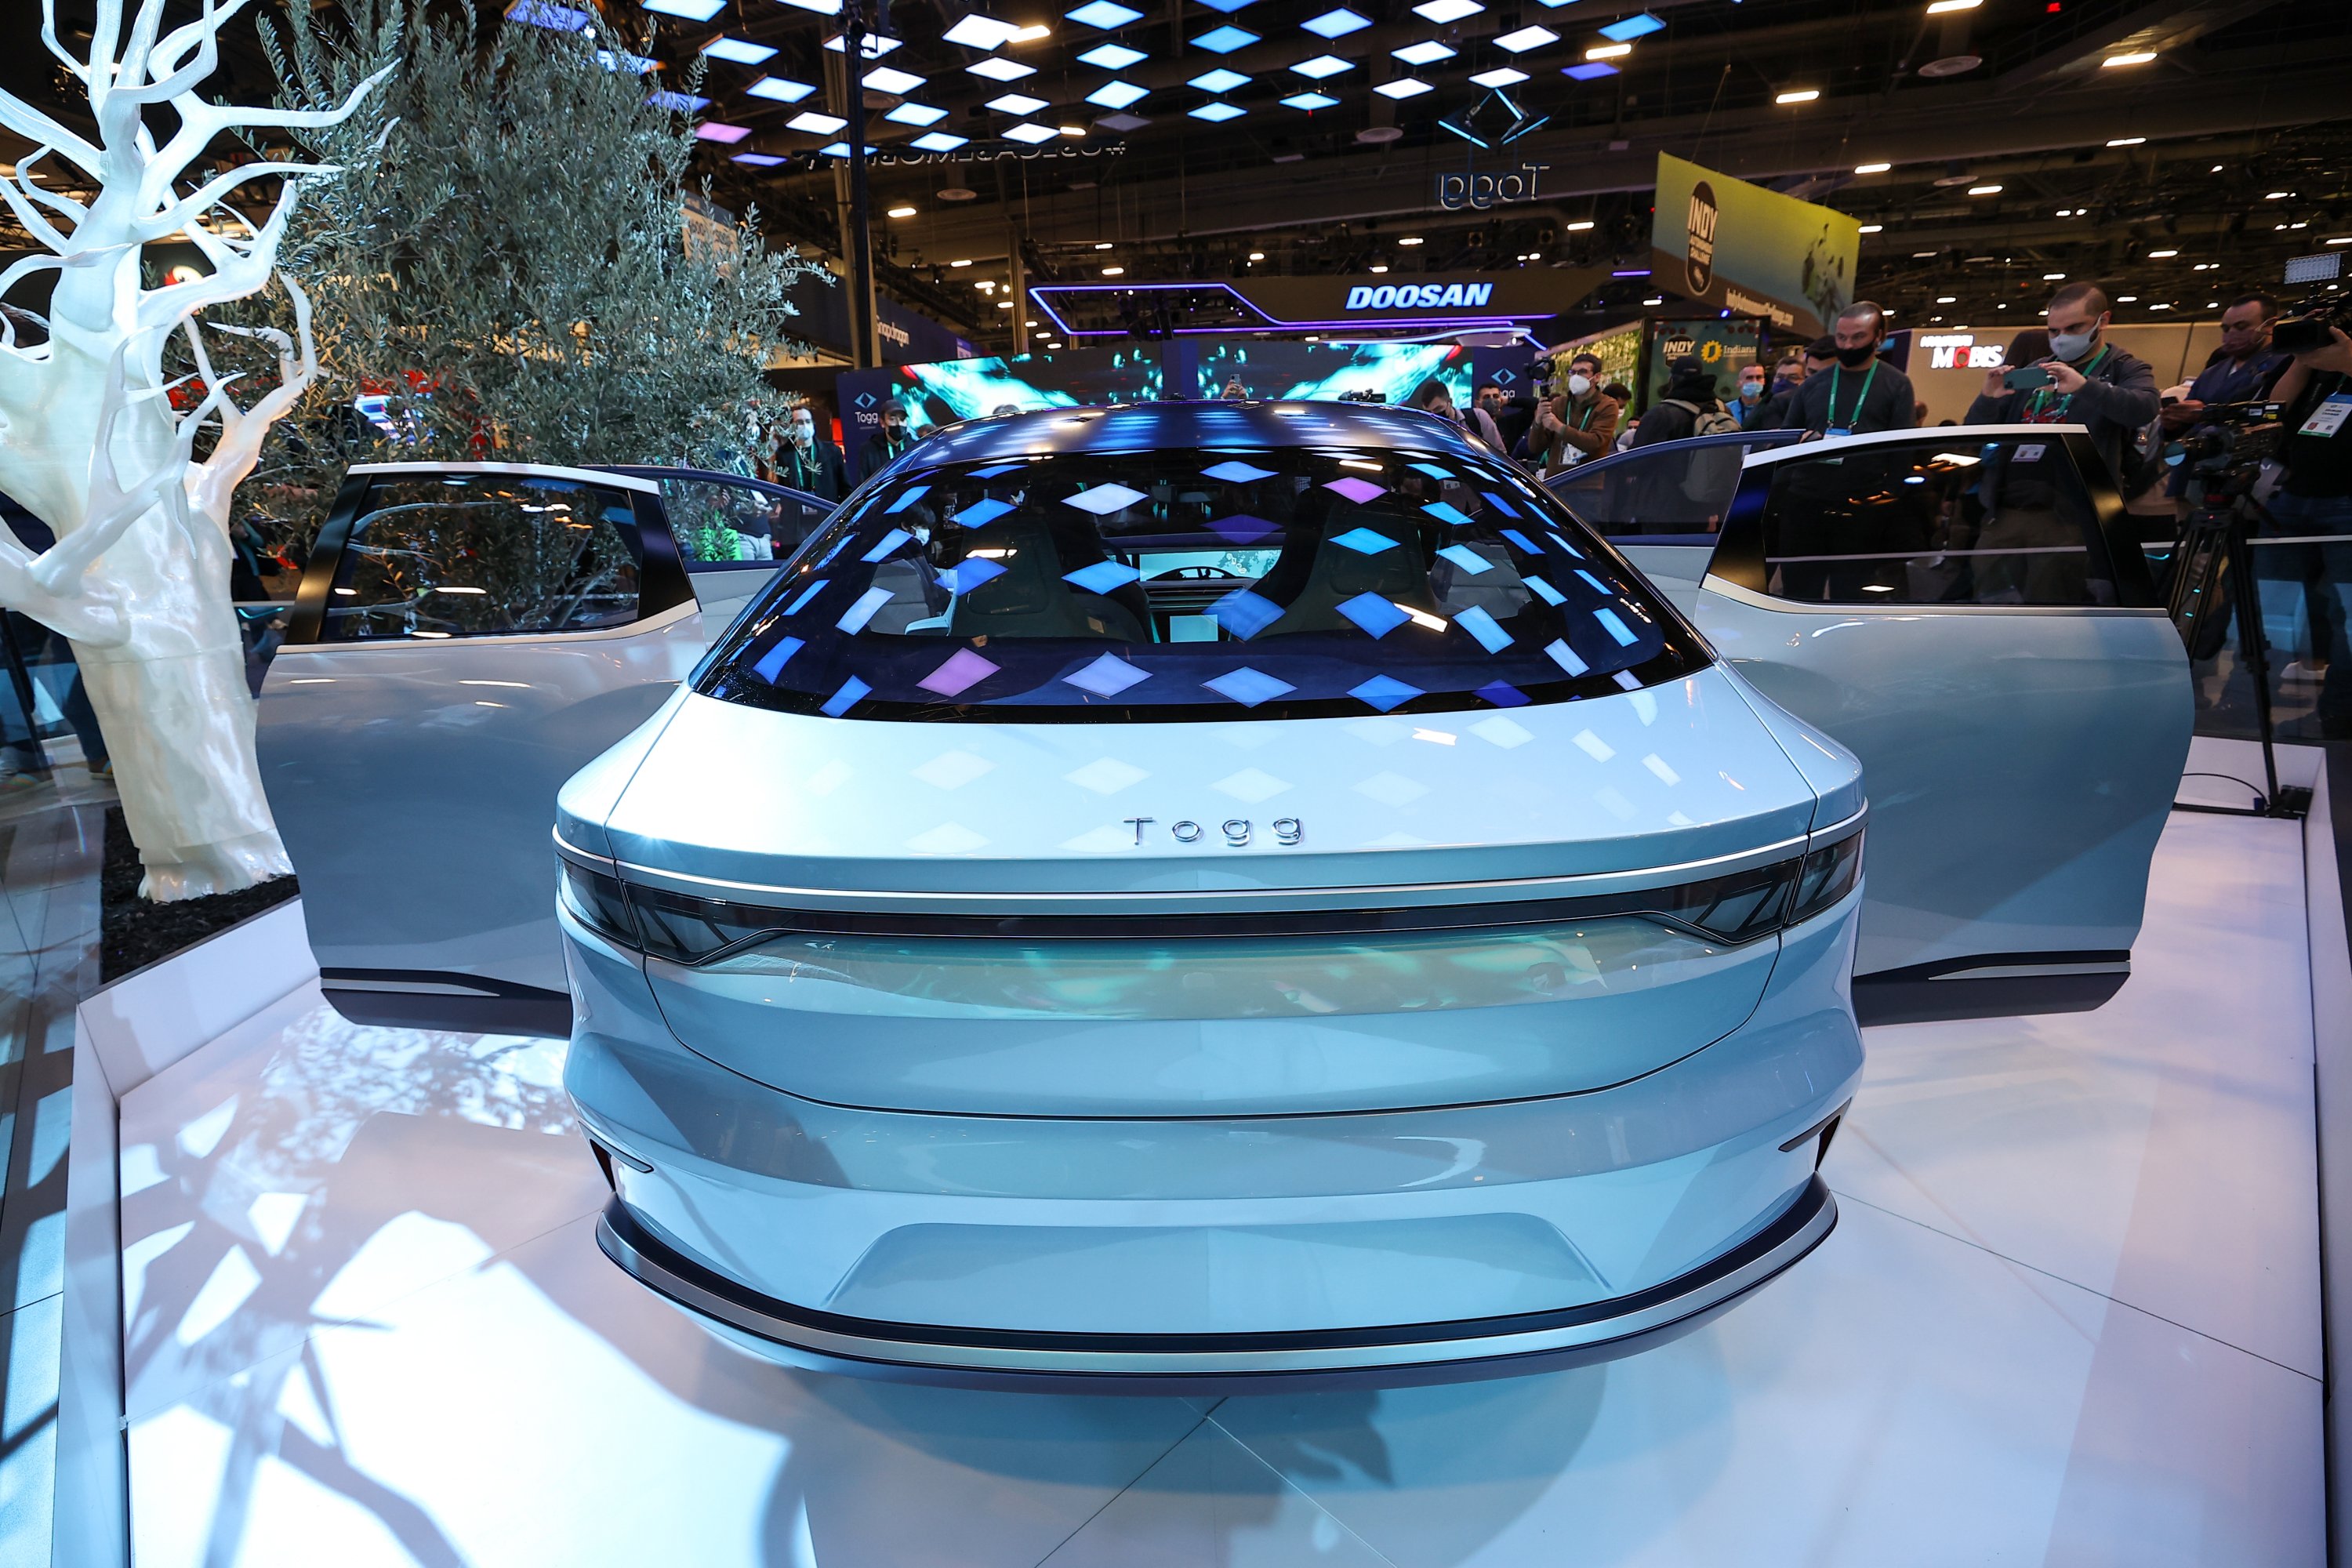 Togg's 'Transition Concept' electric vehicle after it is unveiled during CES 2022 at the Las Vegas Convention Center in Las Vegas, Nevada, U.S., Jan. 5, 2022. (AA Photo)